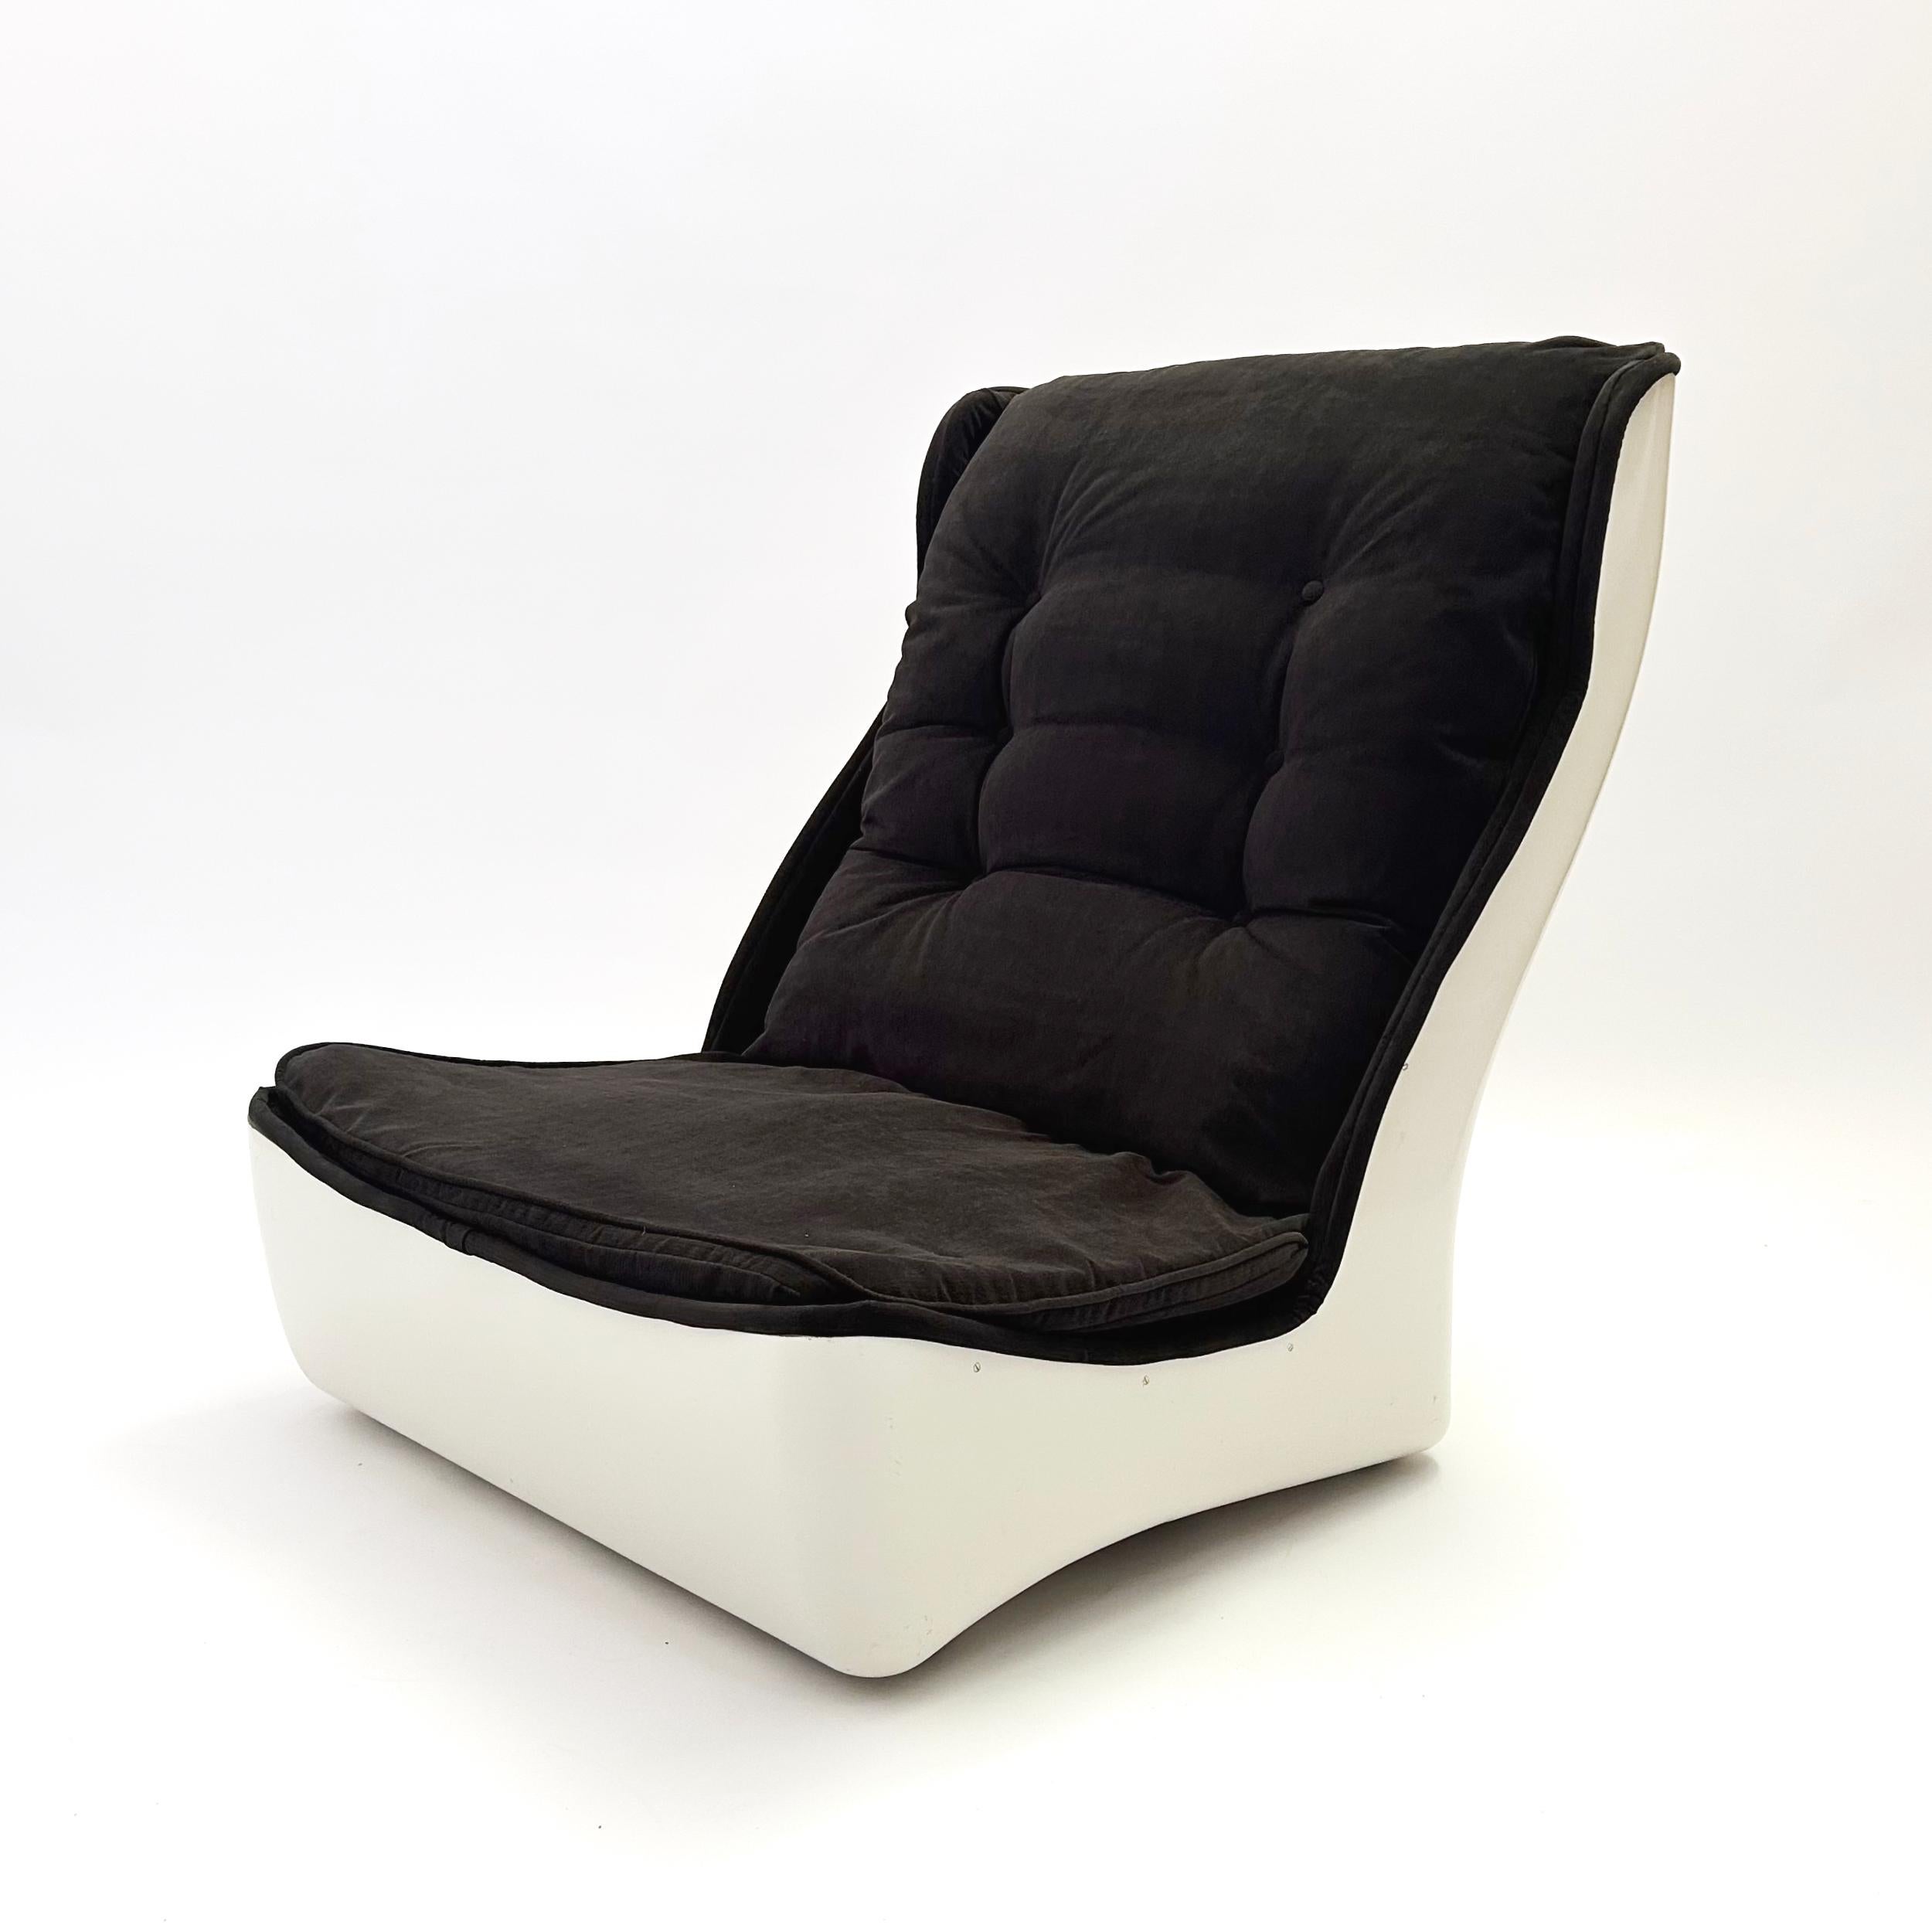 French “Orchidée” Lounge Chair By Michel Cadestin For Airborne, France, 1968 For Sale